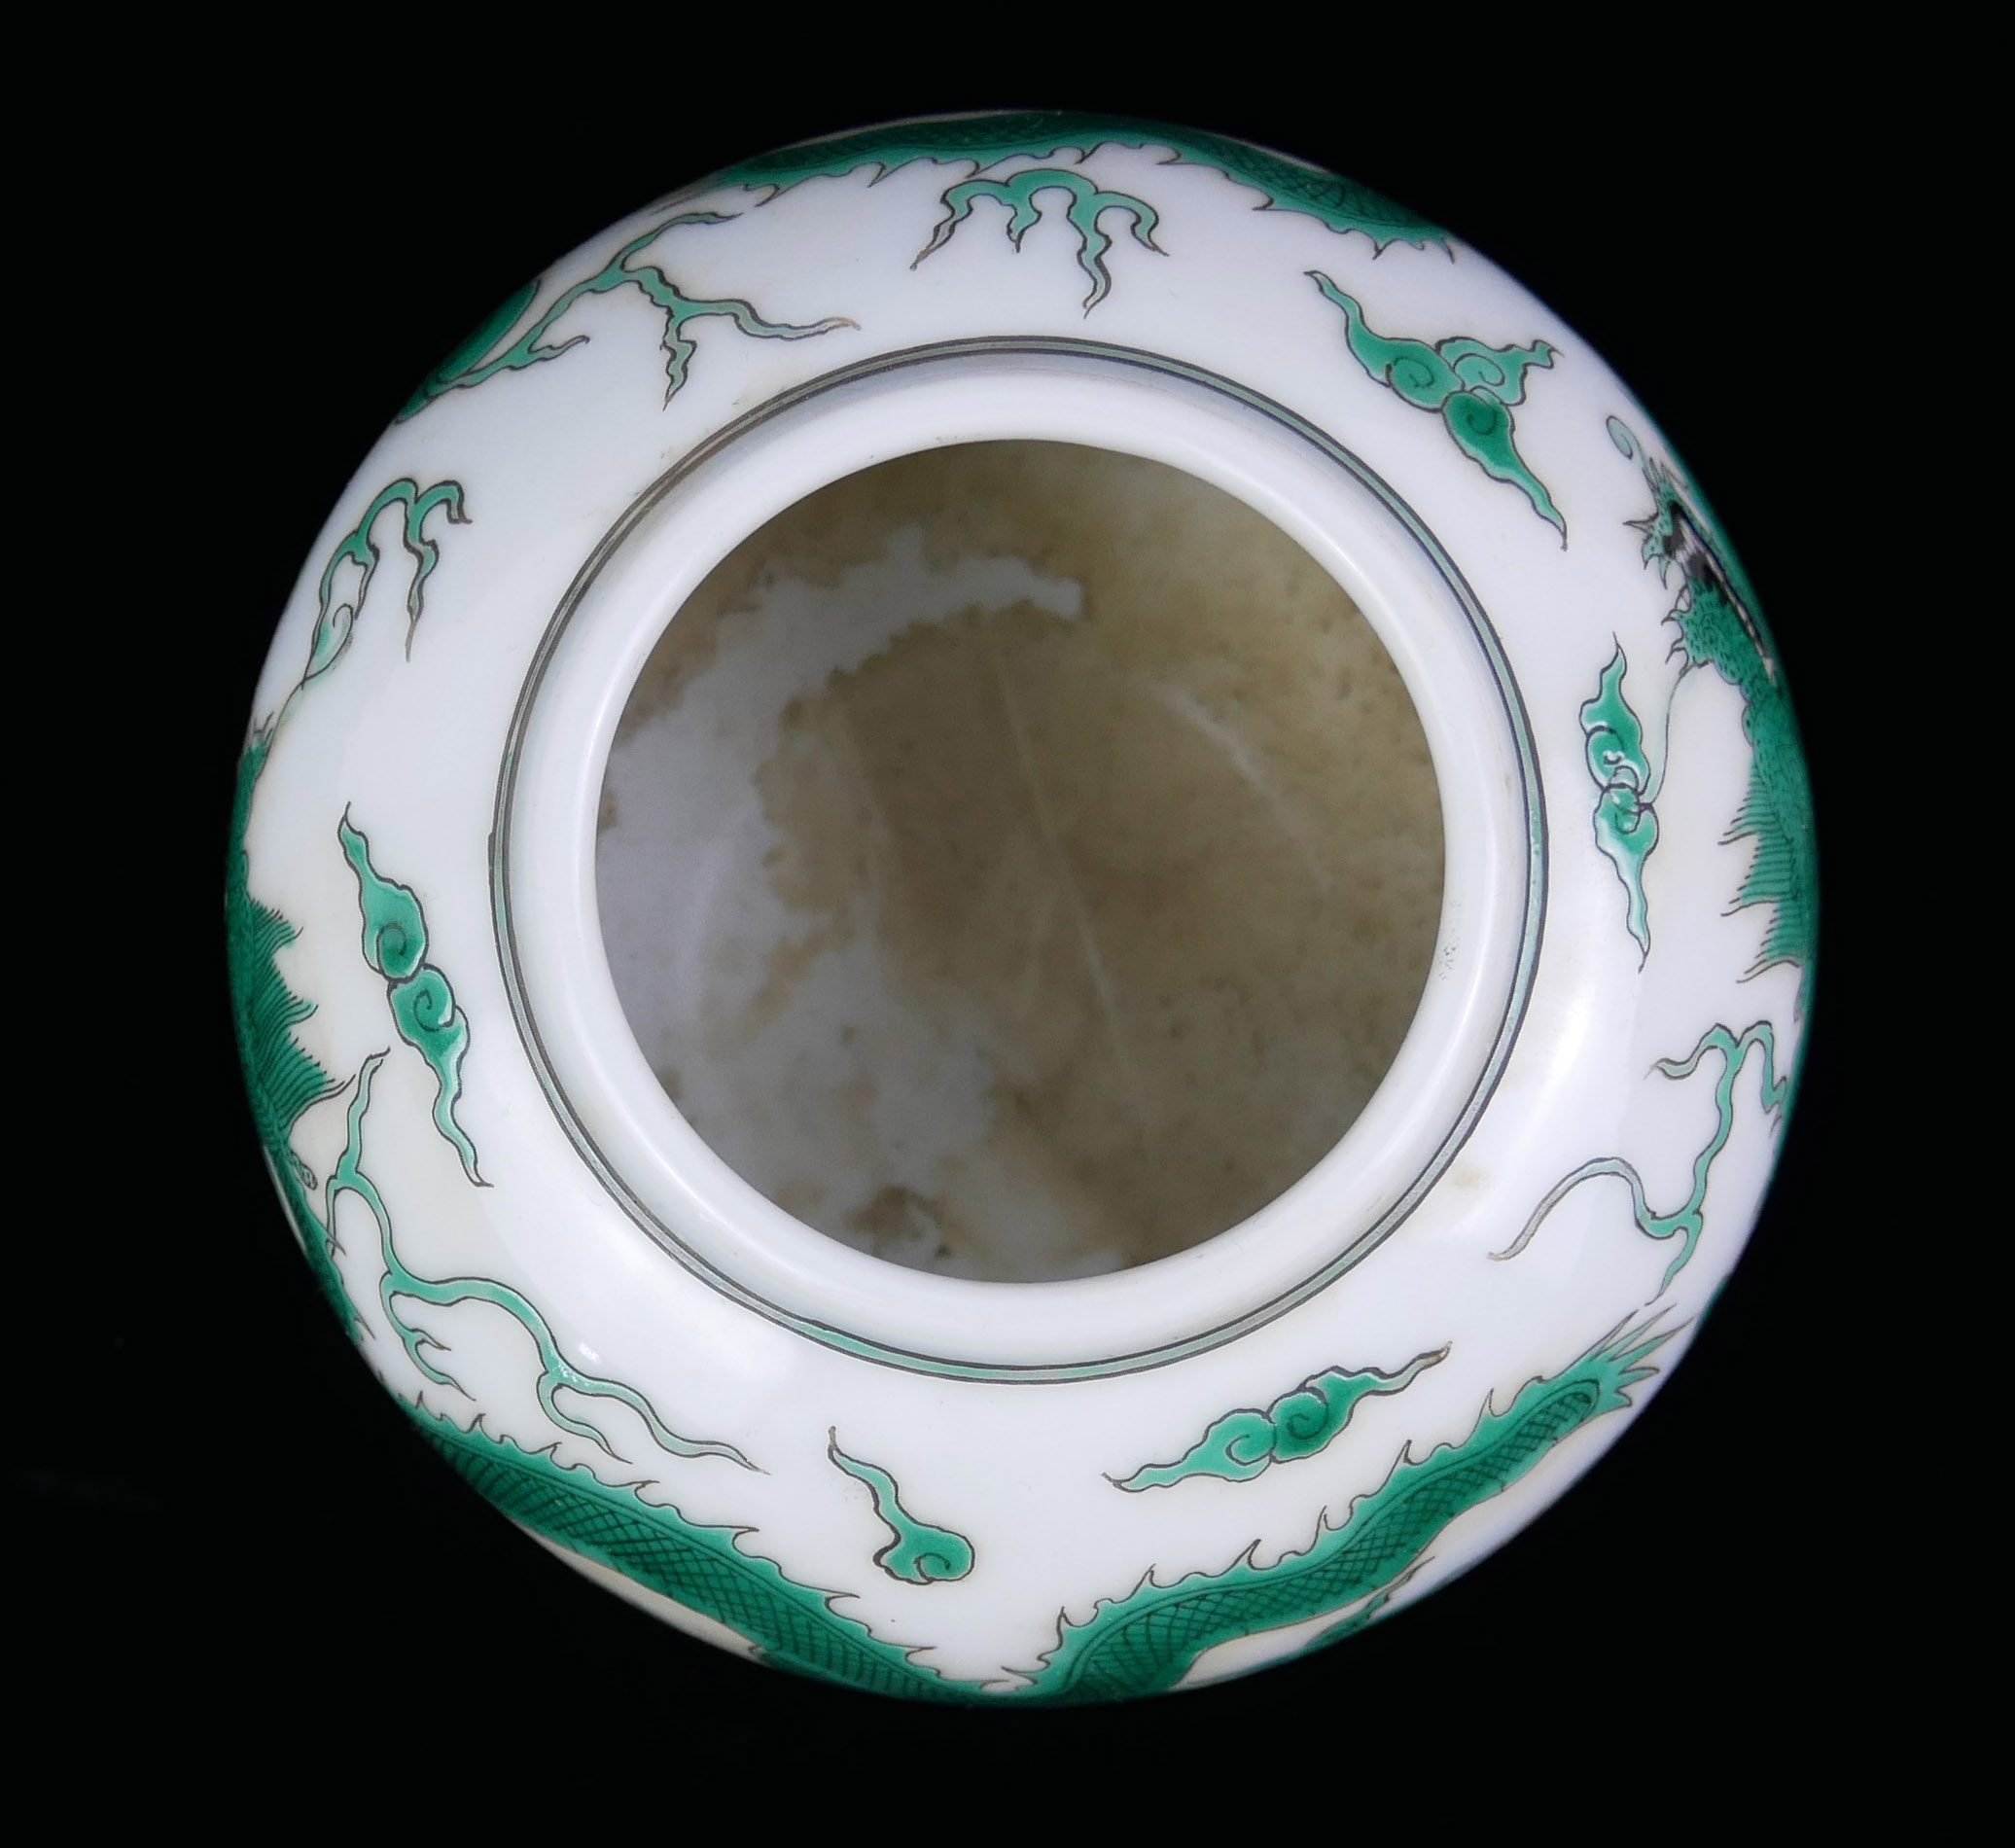 A CHINESE PORCELAIN SPHERICAL 'DRAGON' INKWELL With green opposing dragons chasing a flaming - Image 3 of 4